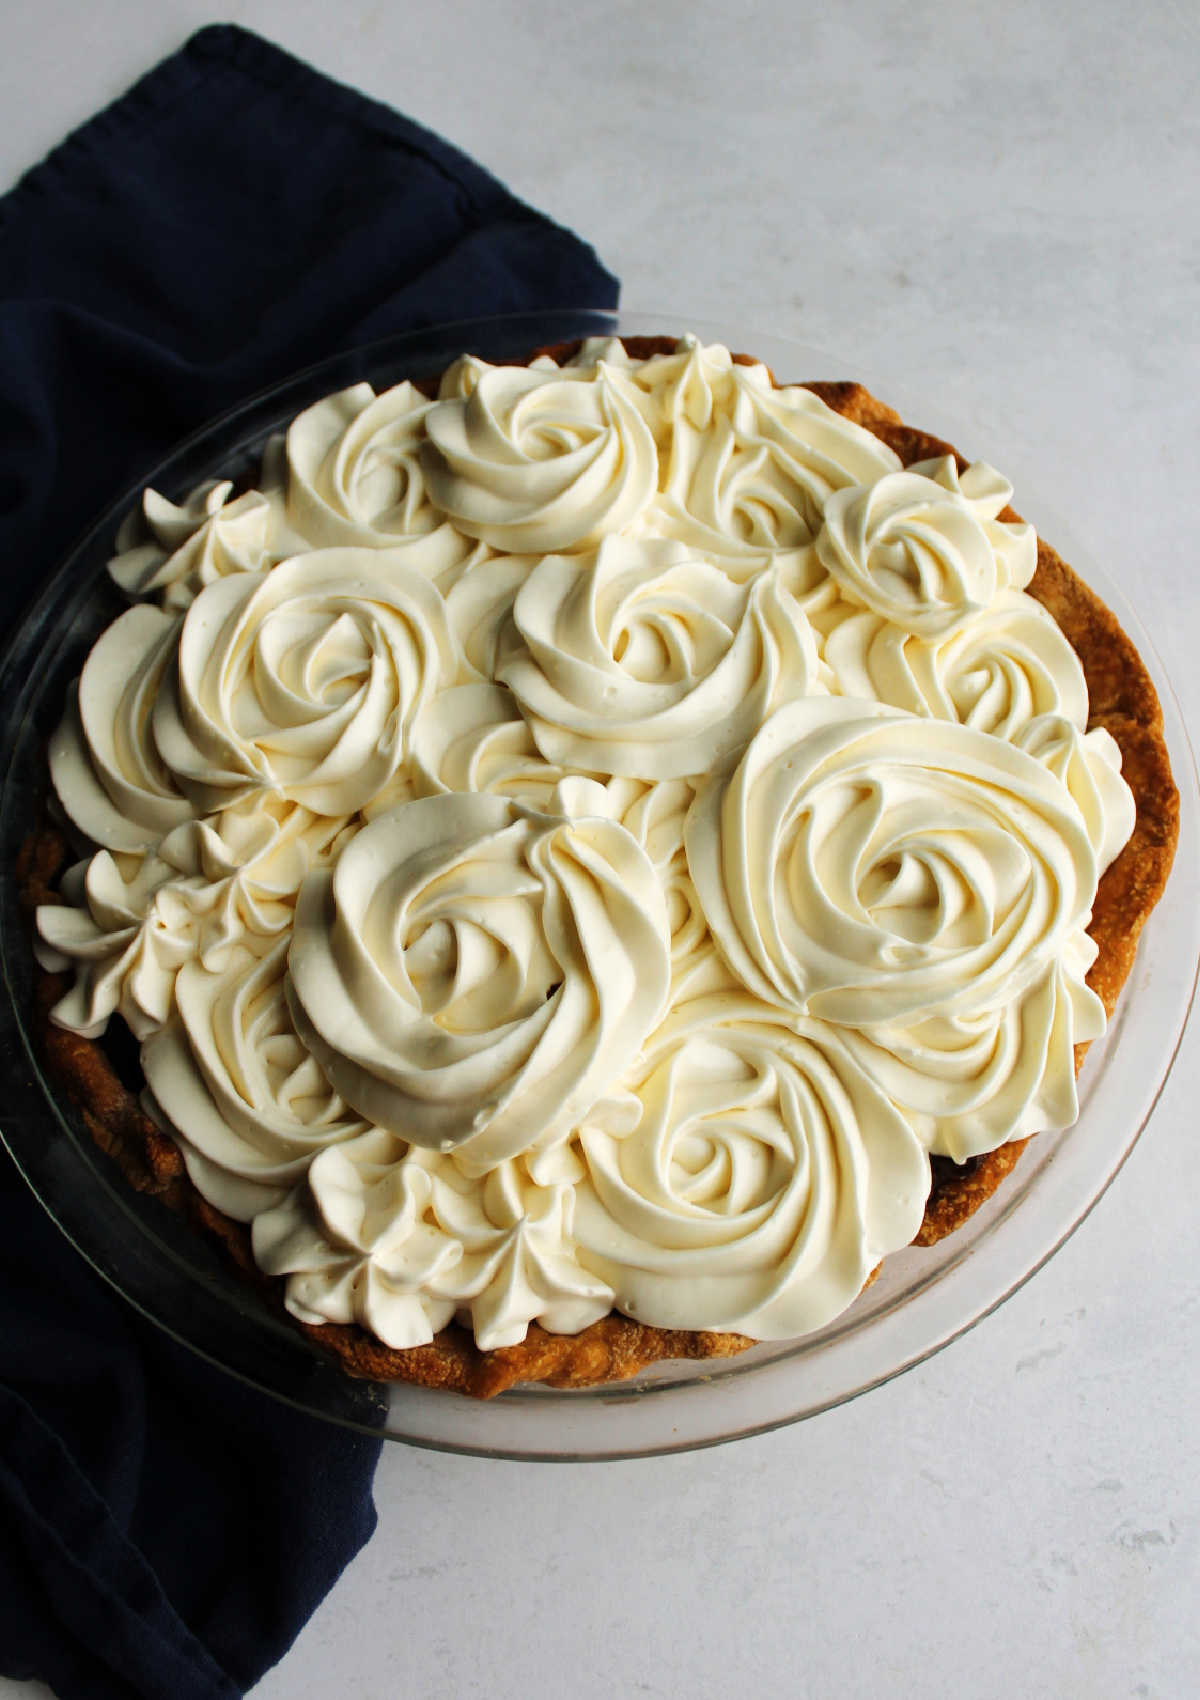 Whole homemade chocolate pie topped with swirls of cream cheese whipped cream.